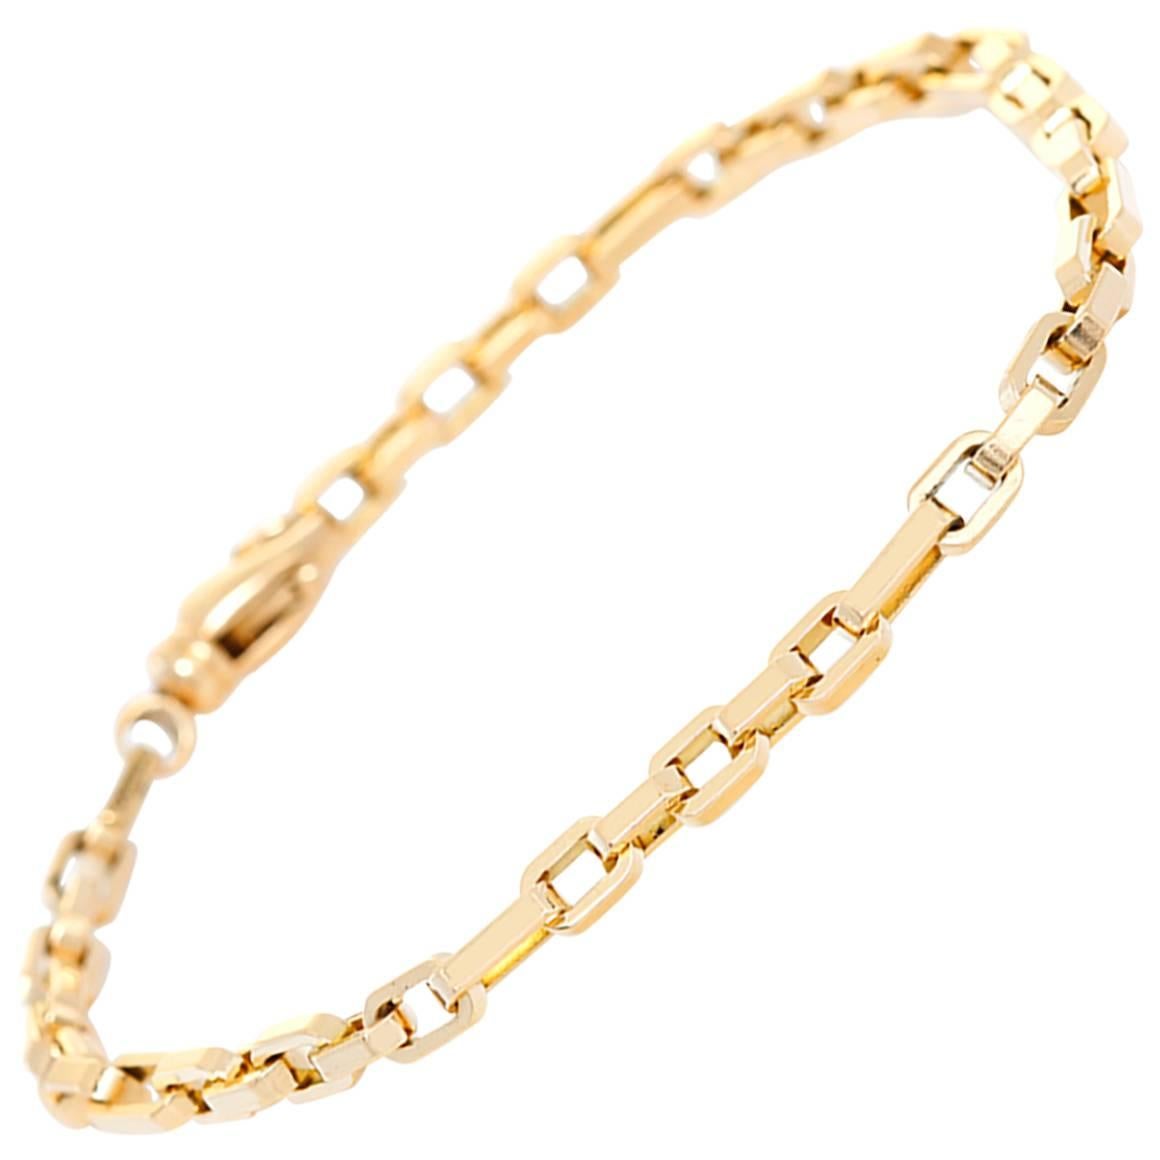 Tiffany & Co. Yellow Gold Square Link Bracelet